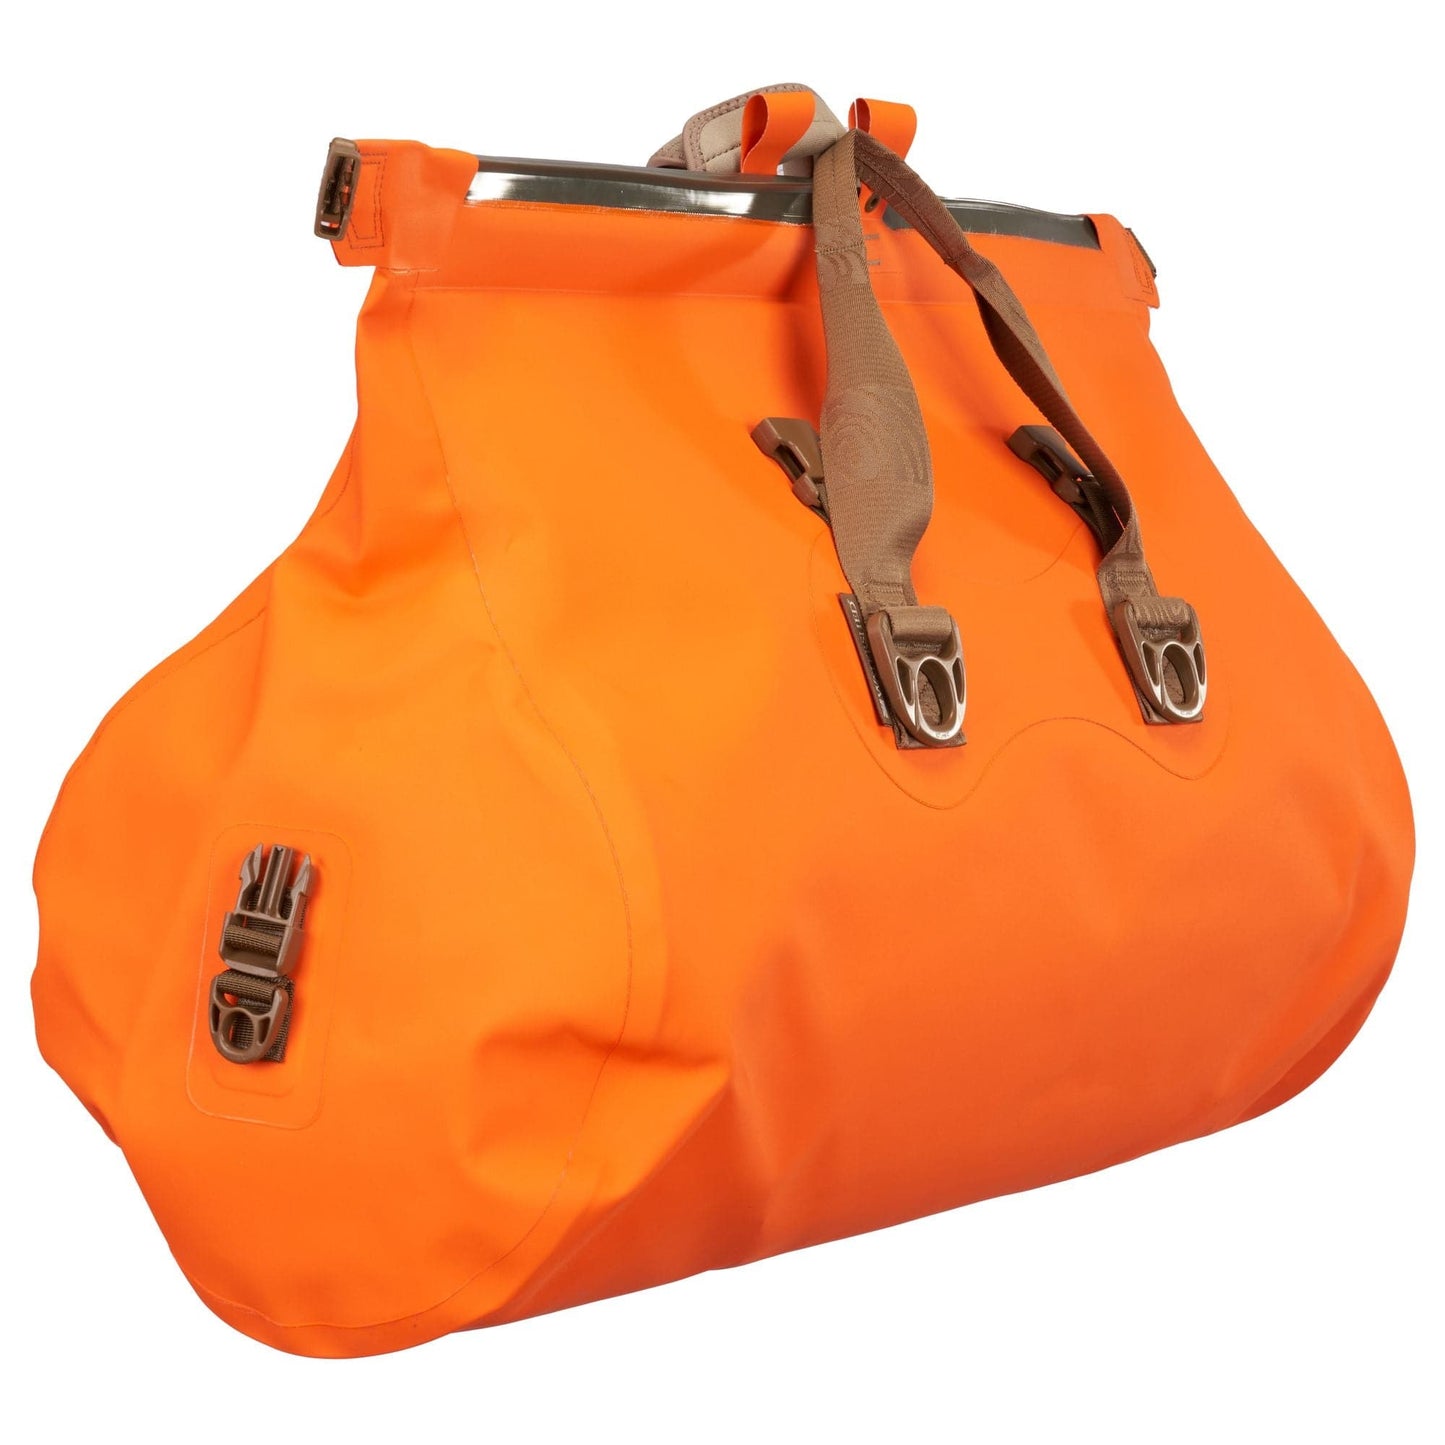 Featuring the Yukon Duffel dry bag manufactured by Watershed shown here from a second angle.